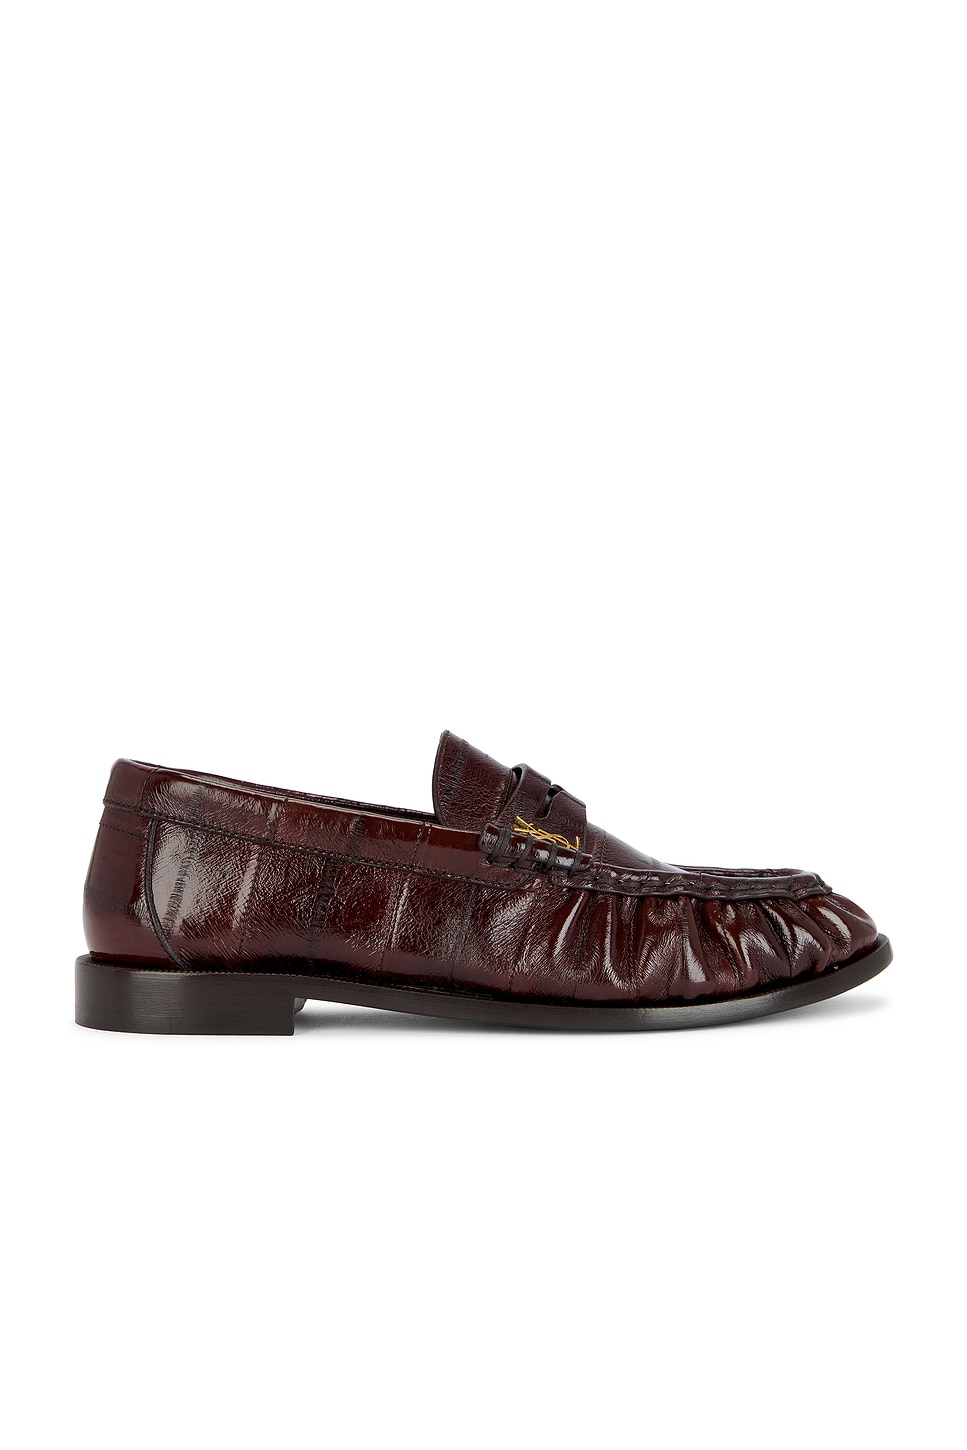 Image 1 of Saint Laurent Le Loafer in Scotch Brown